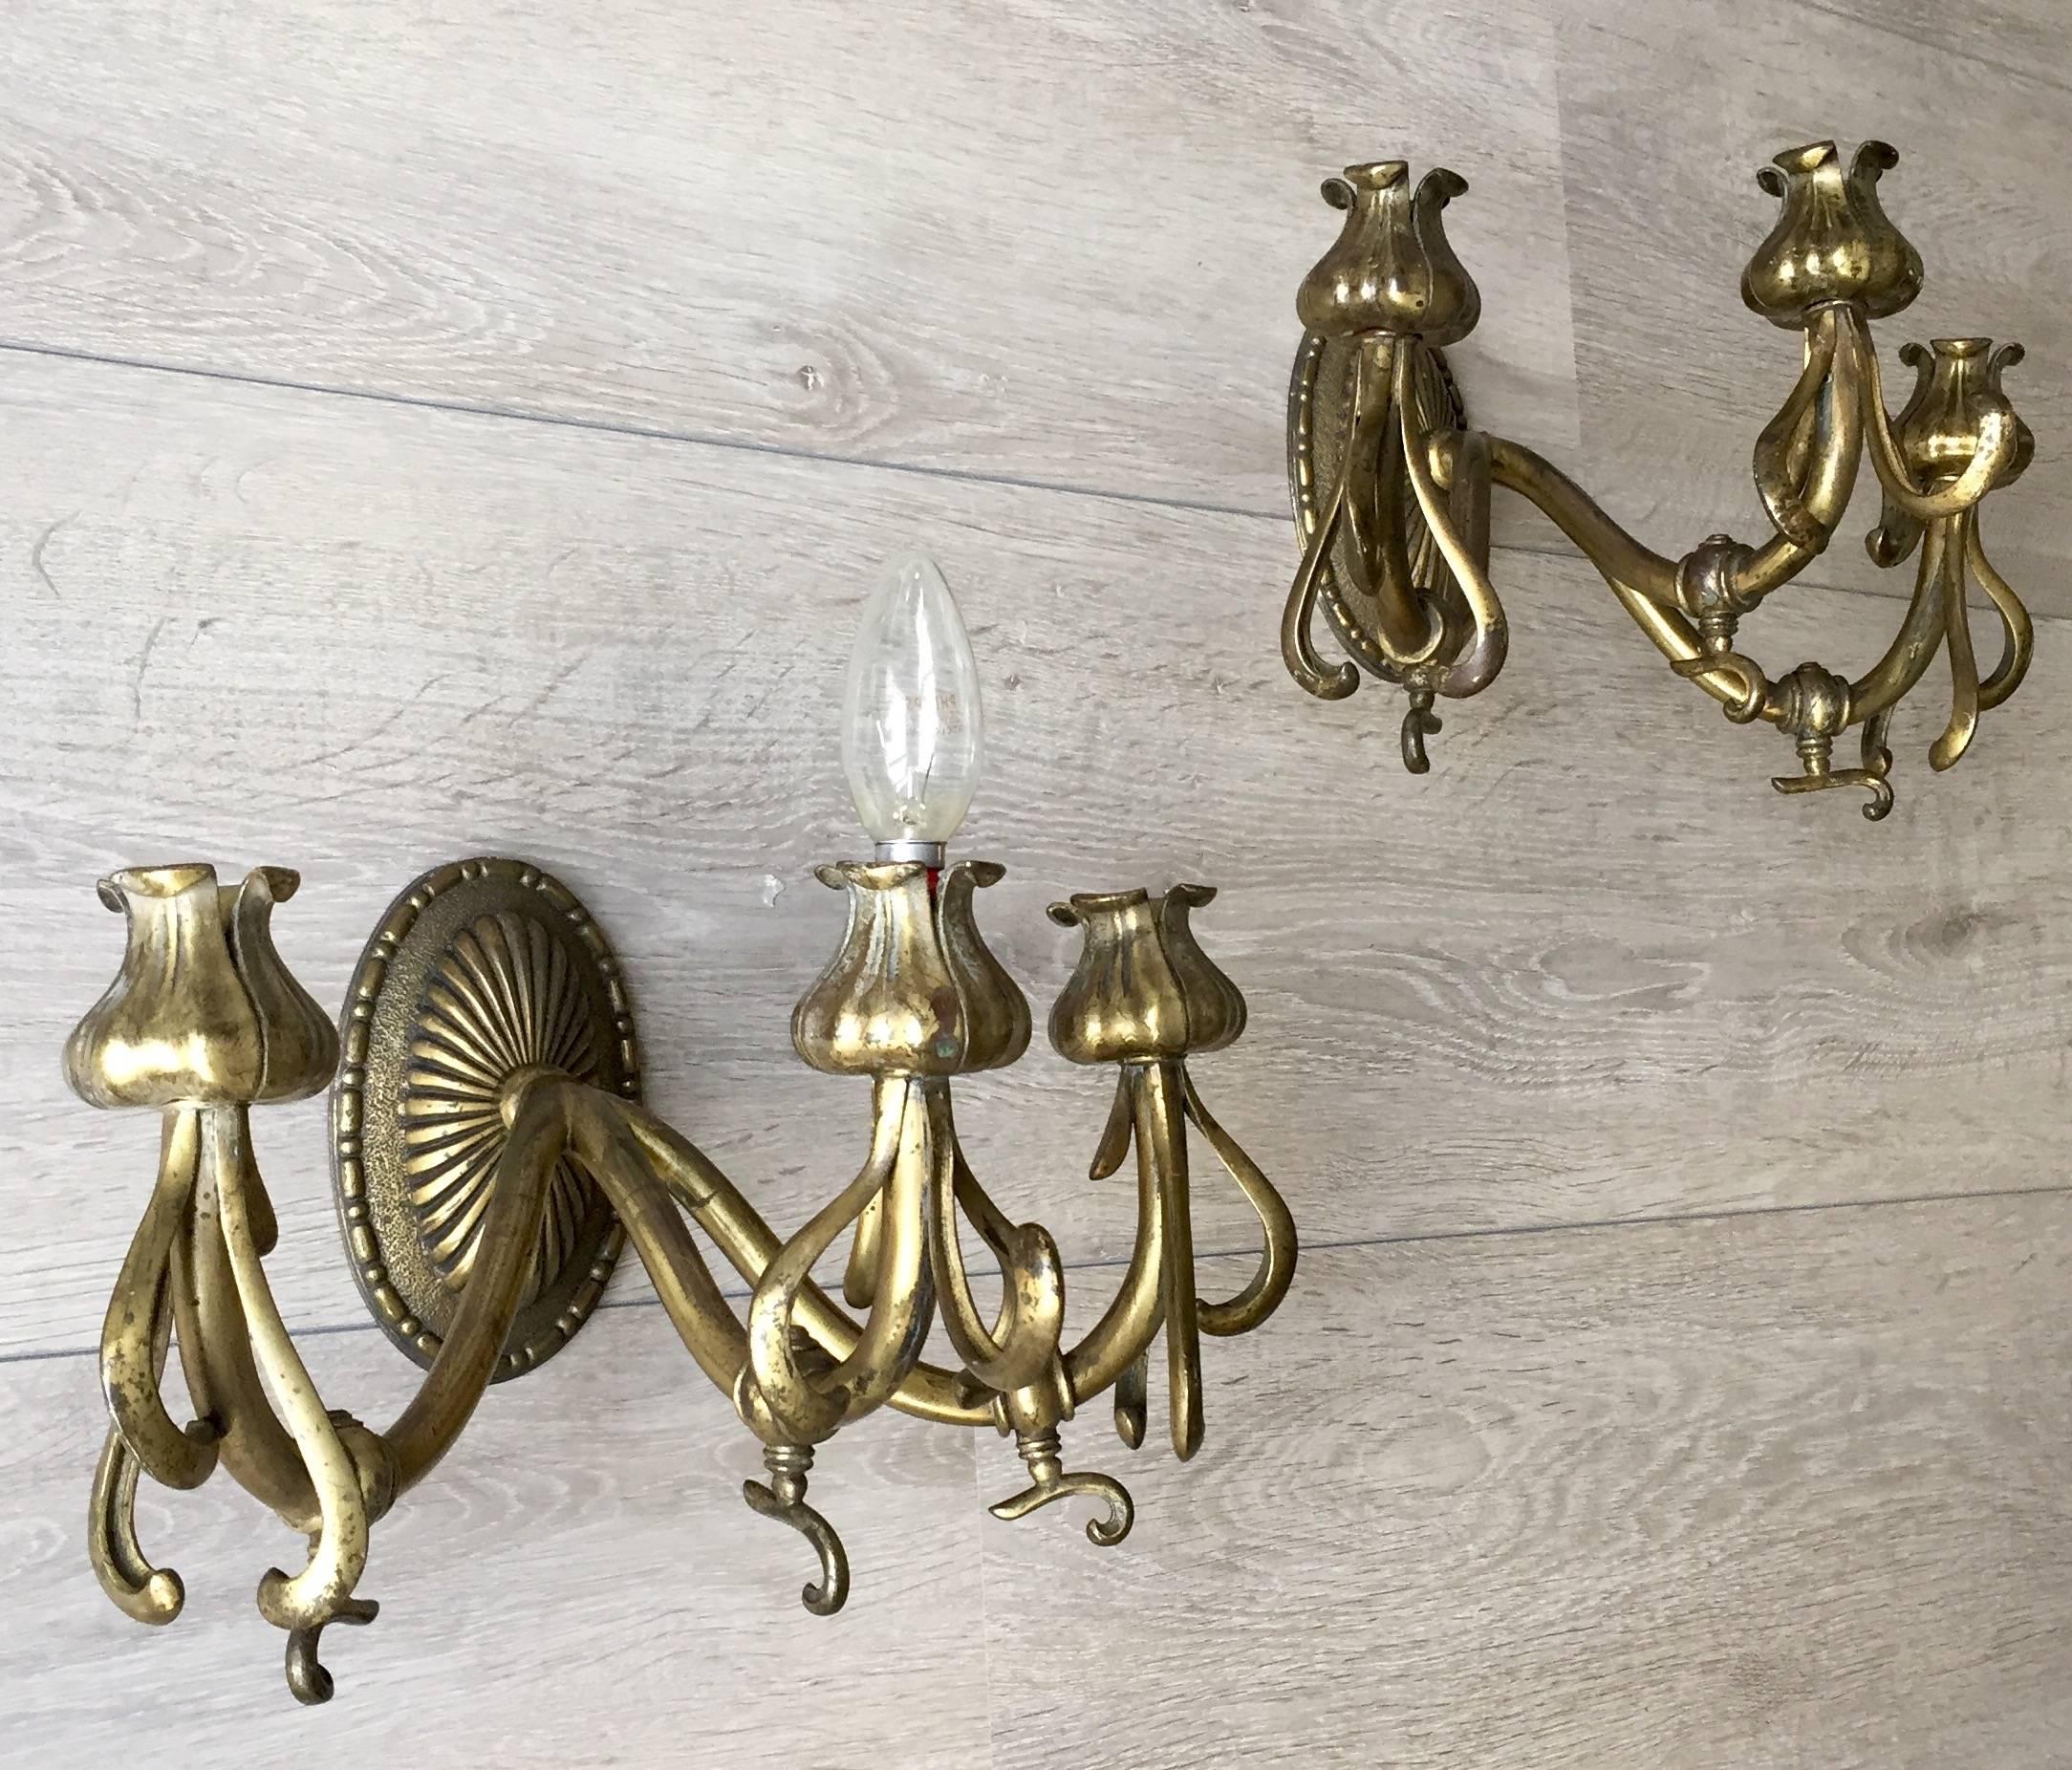 Beautiful Art Nouveau wall sconces from the early 1900s.

This rare and elegant pair of Art Nouveau sconces could also be from the 1890's, because they come with the original gas fittings. The design radiates pure elegance and the details show they